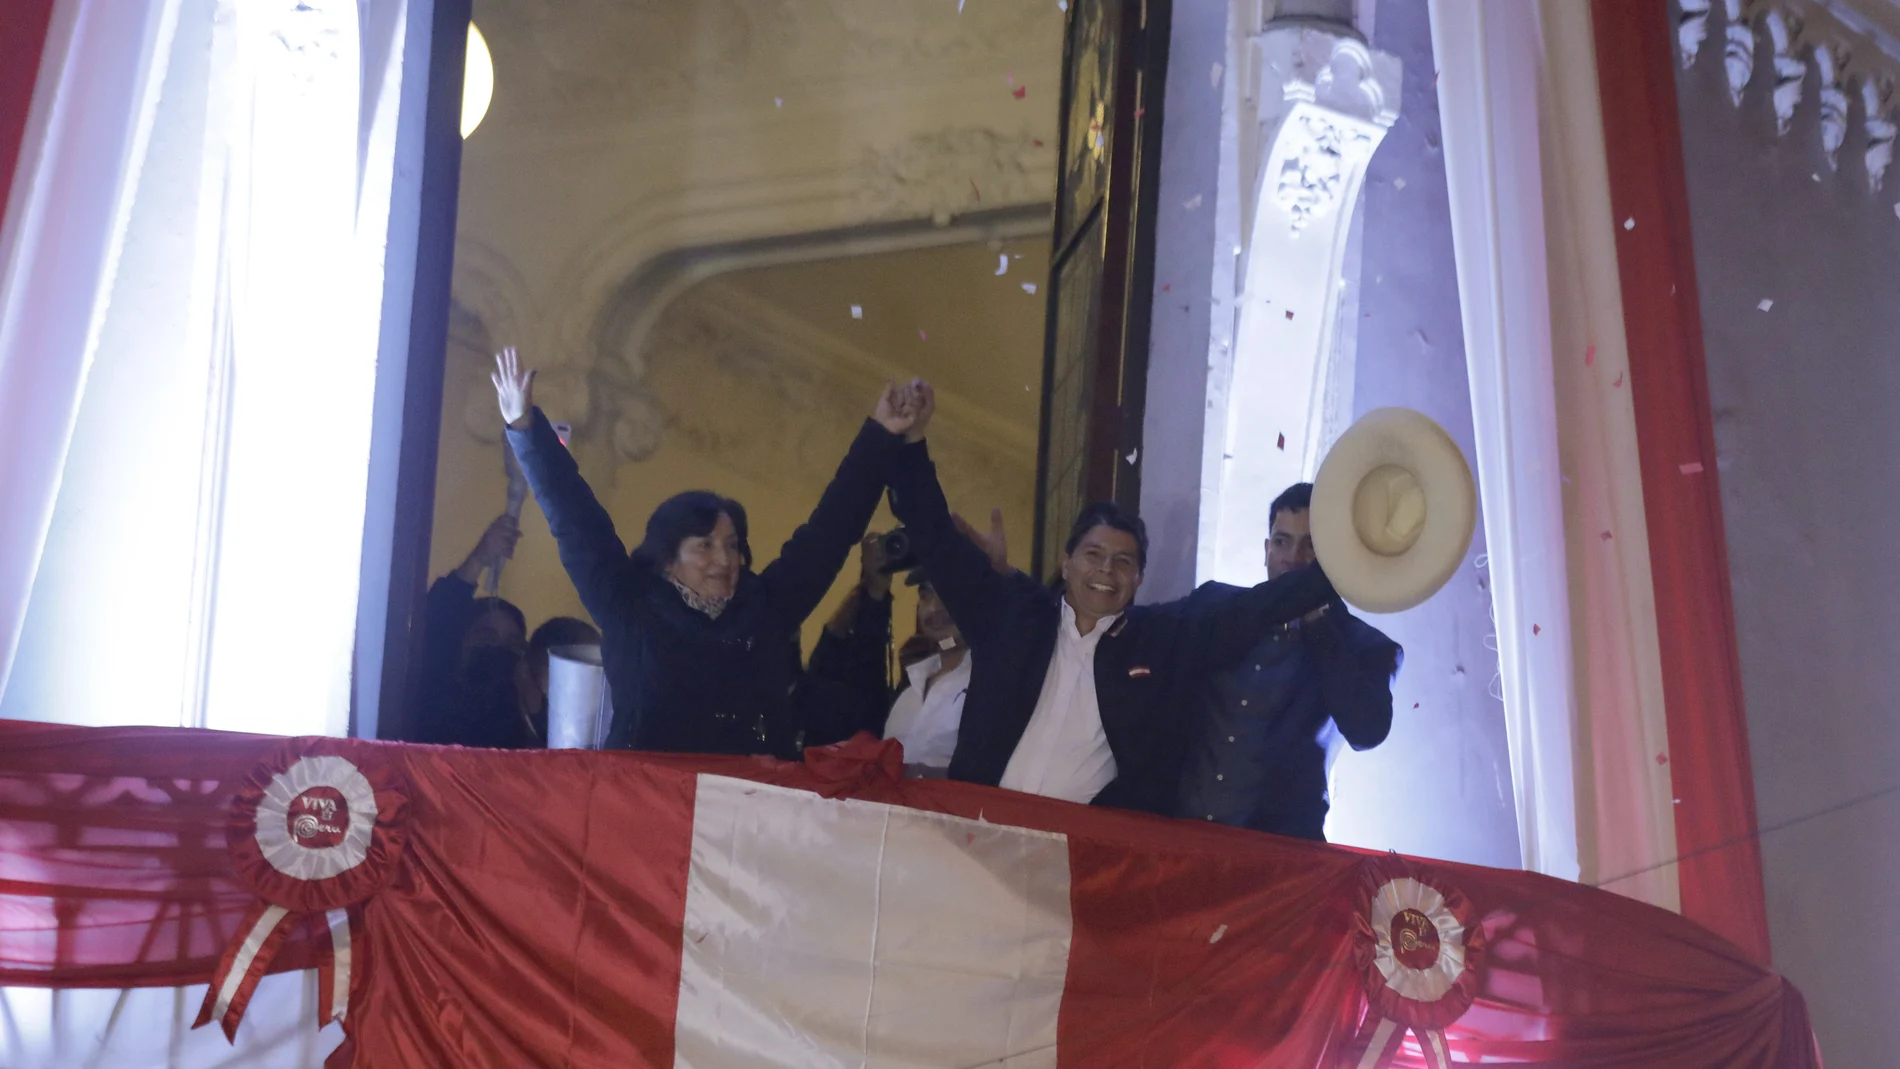 Pedro Castillo, center, celebrates with his running mate Dina Boluarte after being declared president-elect by election authorities at their campaign headquarters in Lima, Peru, Monday, July 19, 2021. Castillo was declared the winner more than a month after elections took place and after opponent Keiko Fujimori claimed that the election was tainted by fraud. (AP Photo/Guadalupe Prado)